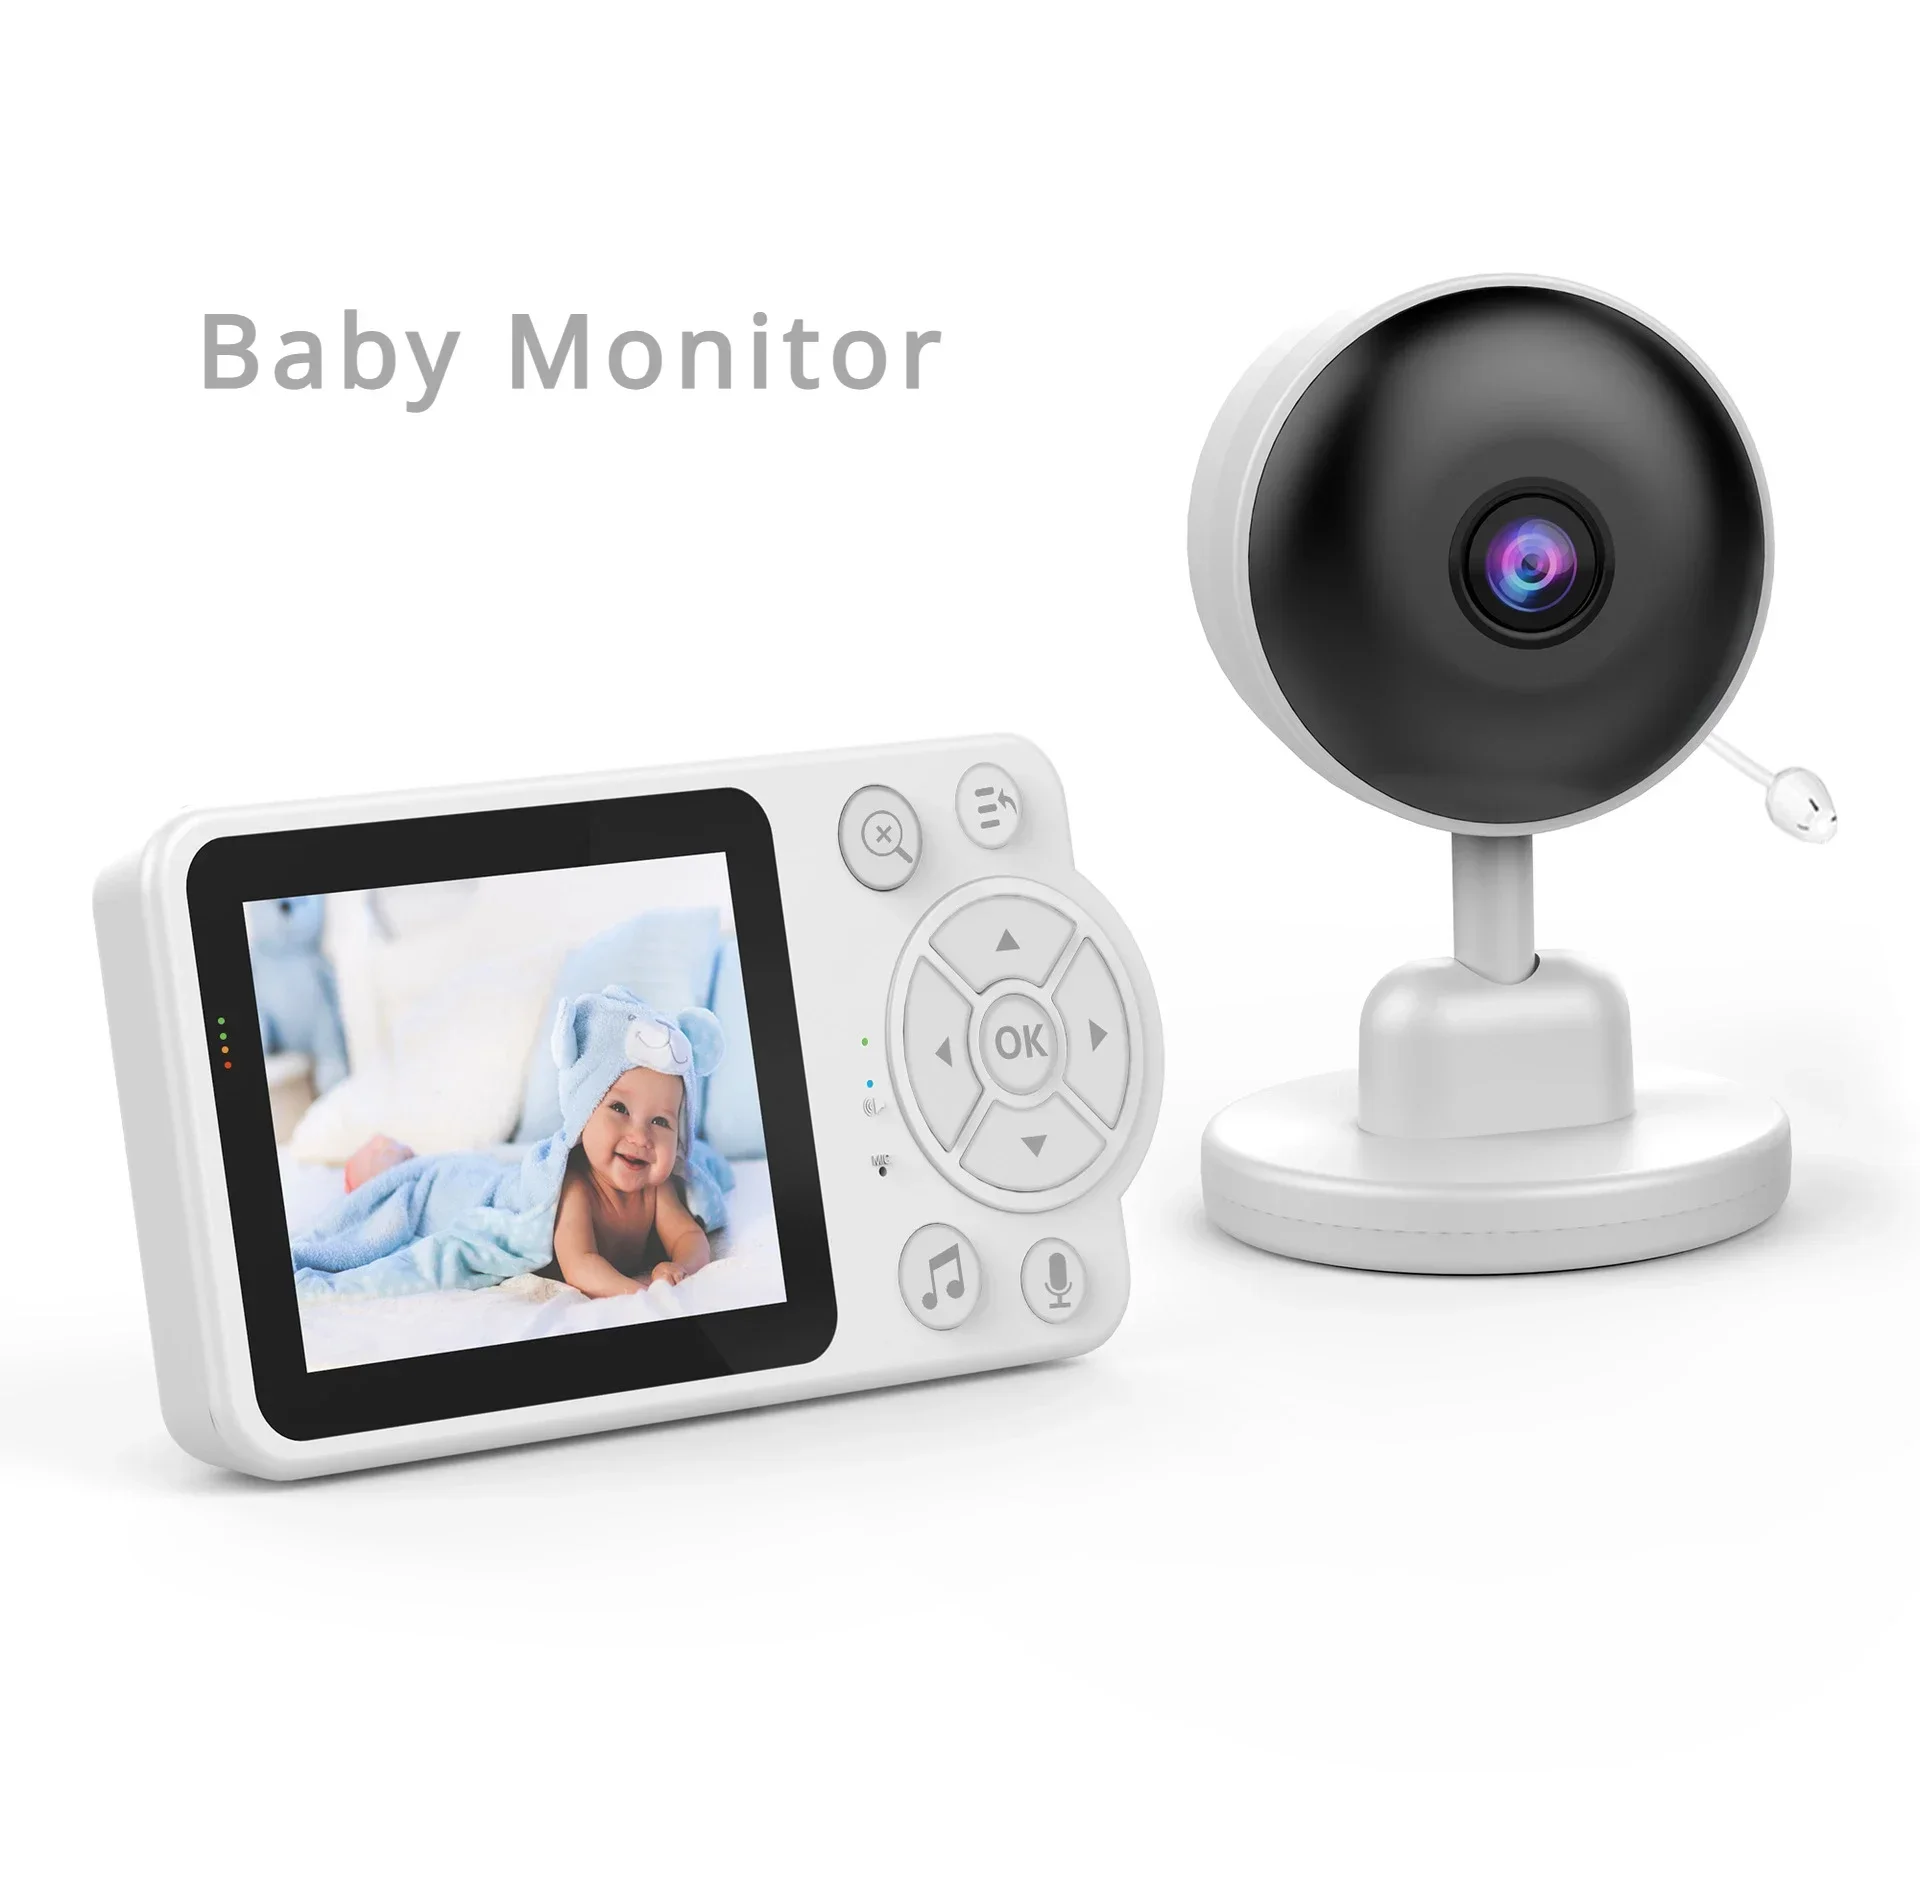 

Wireless Baby Monitor Security Protection Two Way Audio Night Vision Indoor 2.8" TFT Screen Surveillance Video Smart Baby Camera